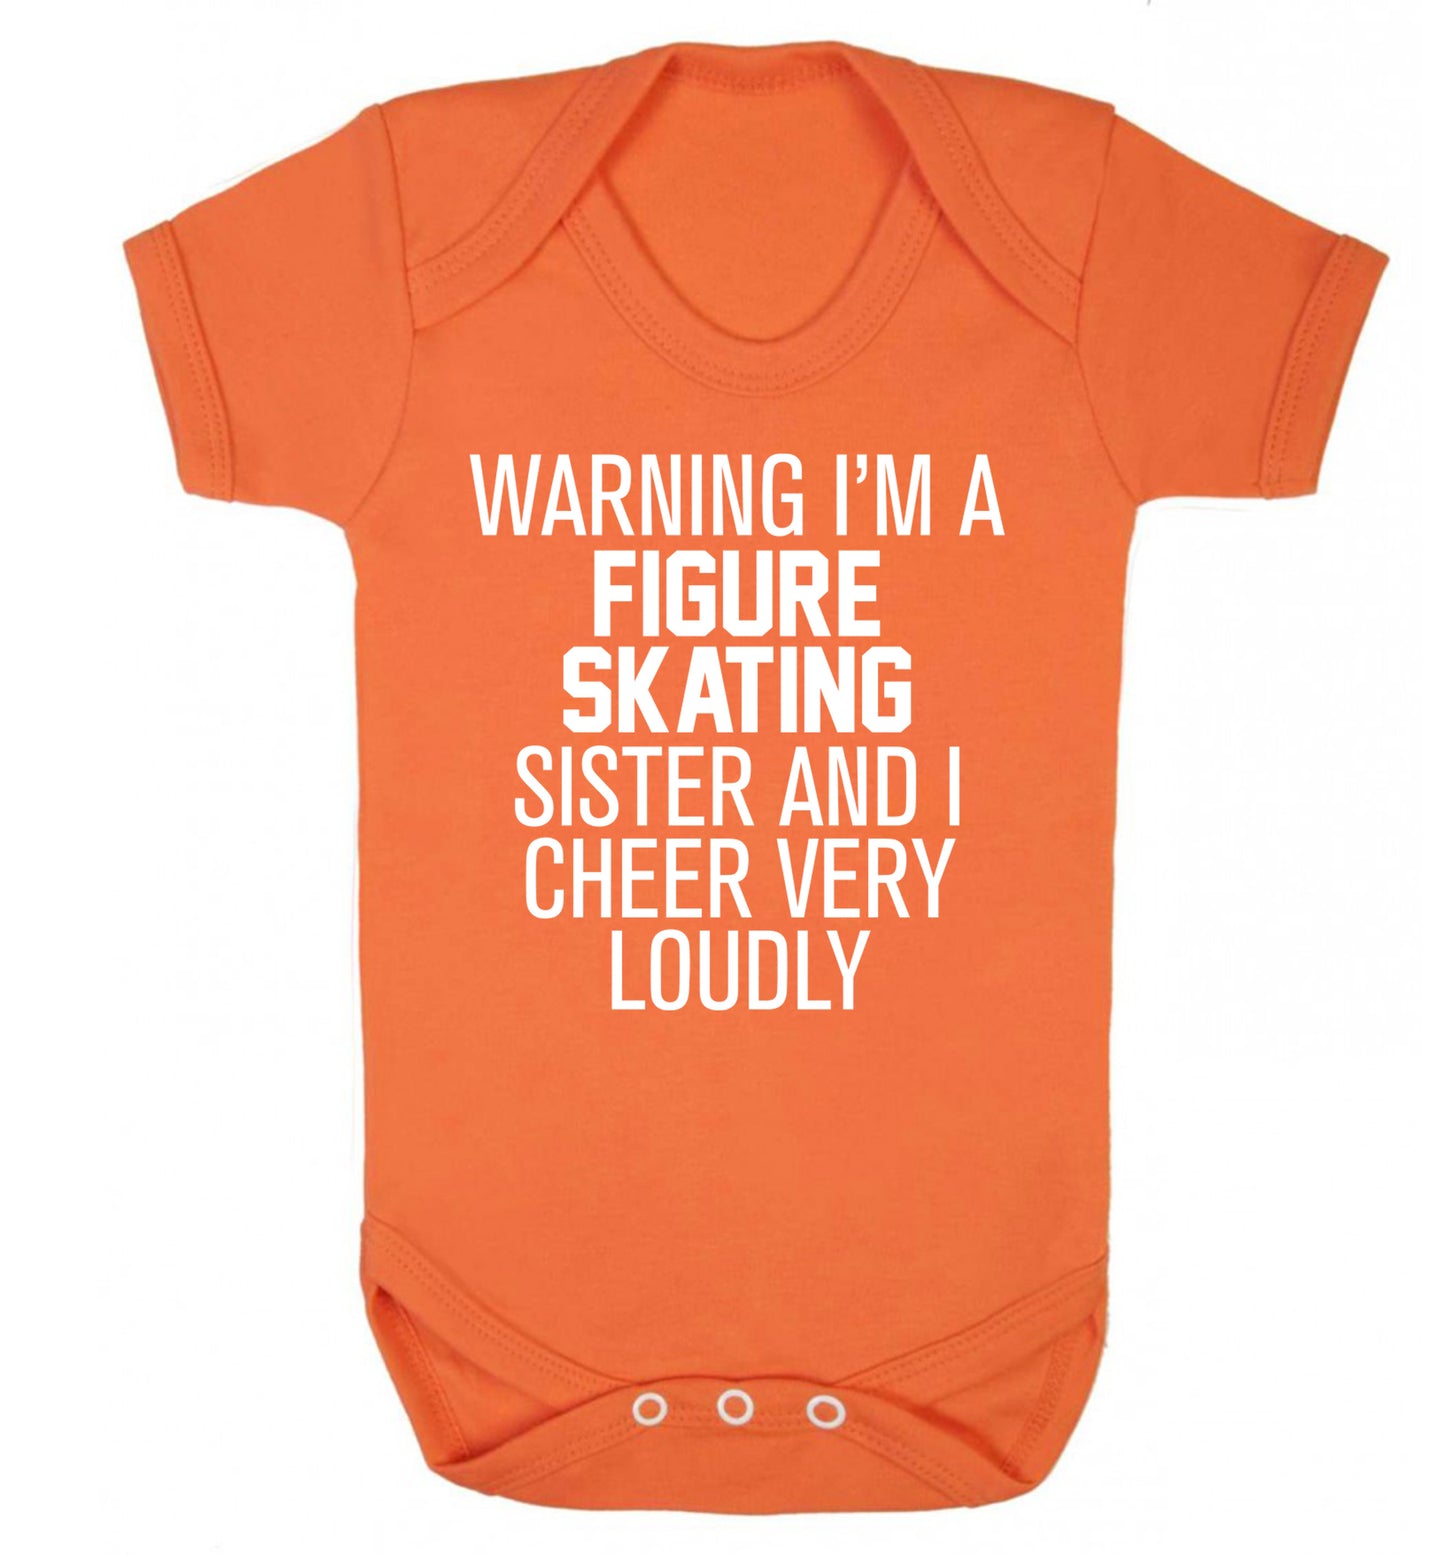 Warning I'm a figure skating sister and I cheer very loudly Baby Vest orange 18-24 months